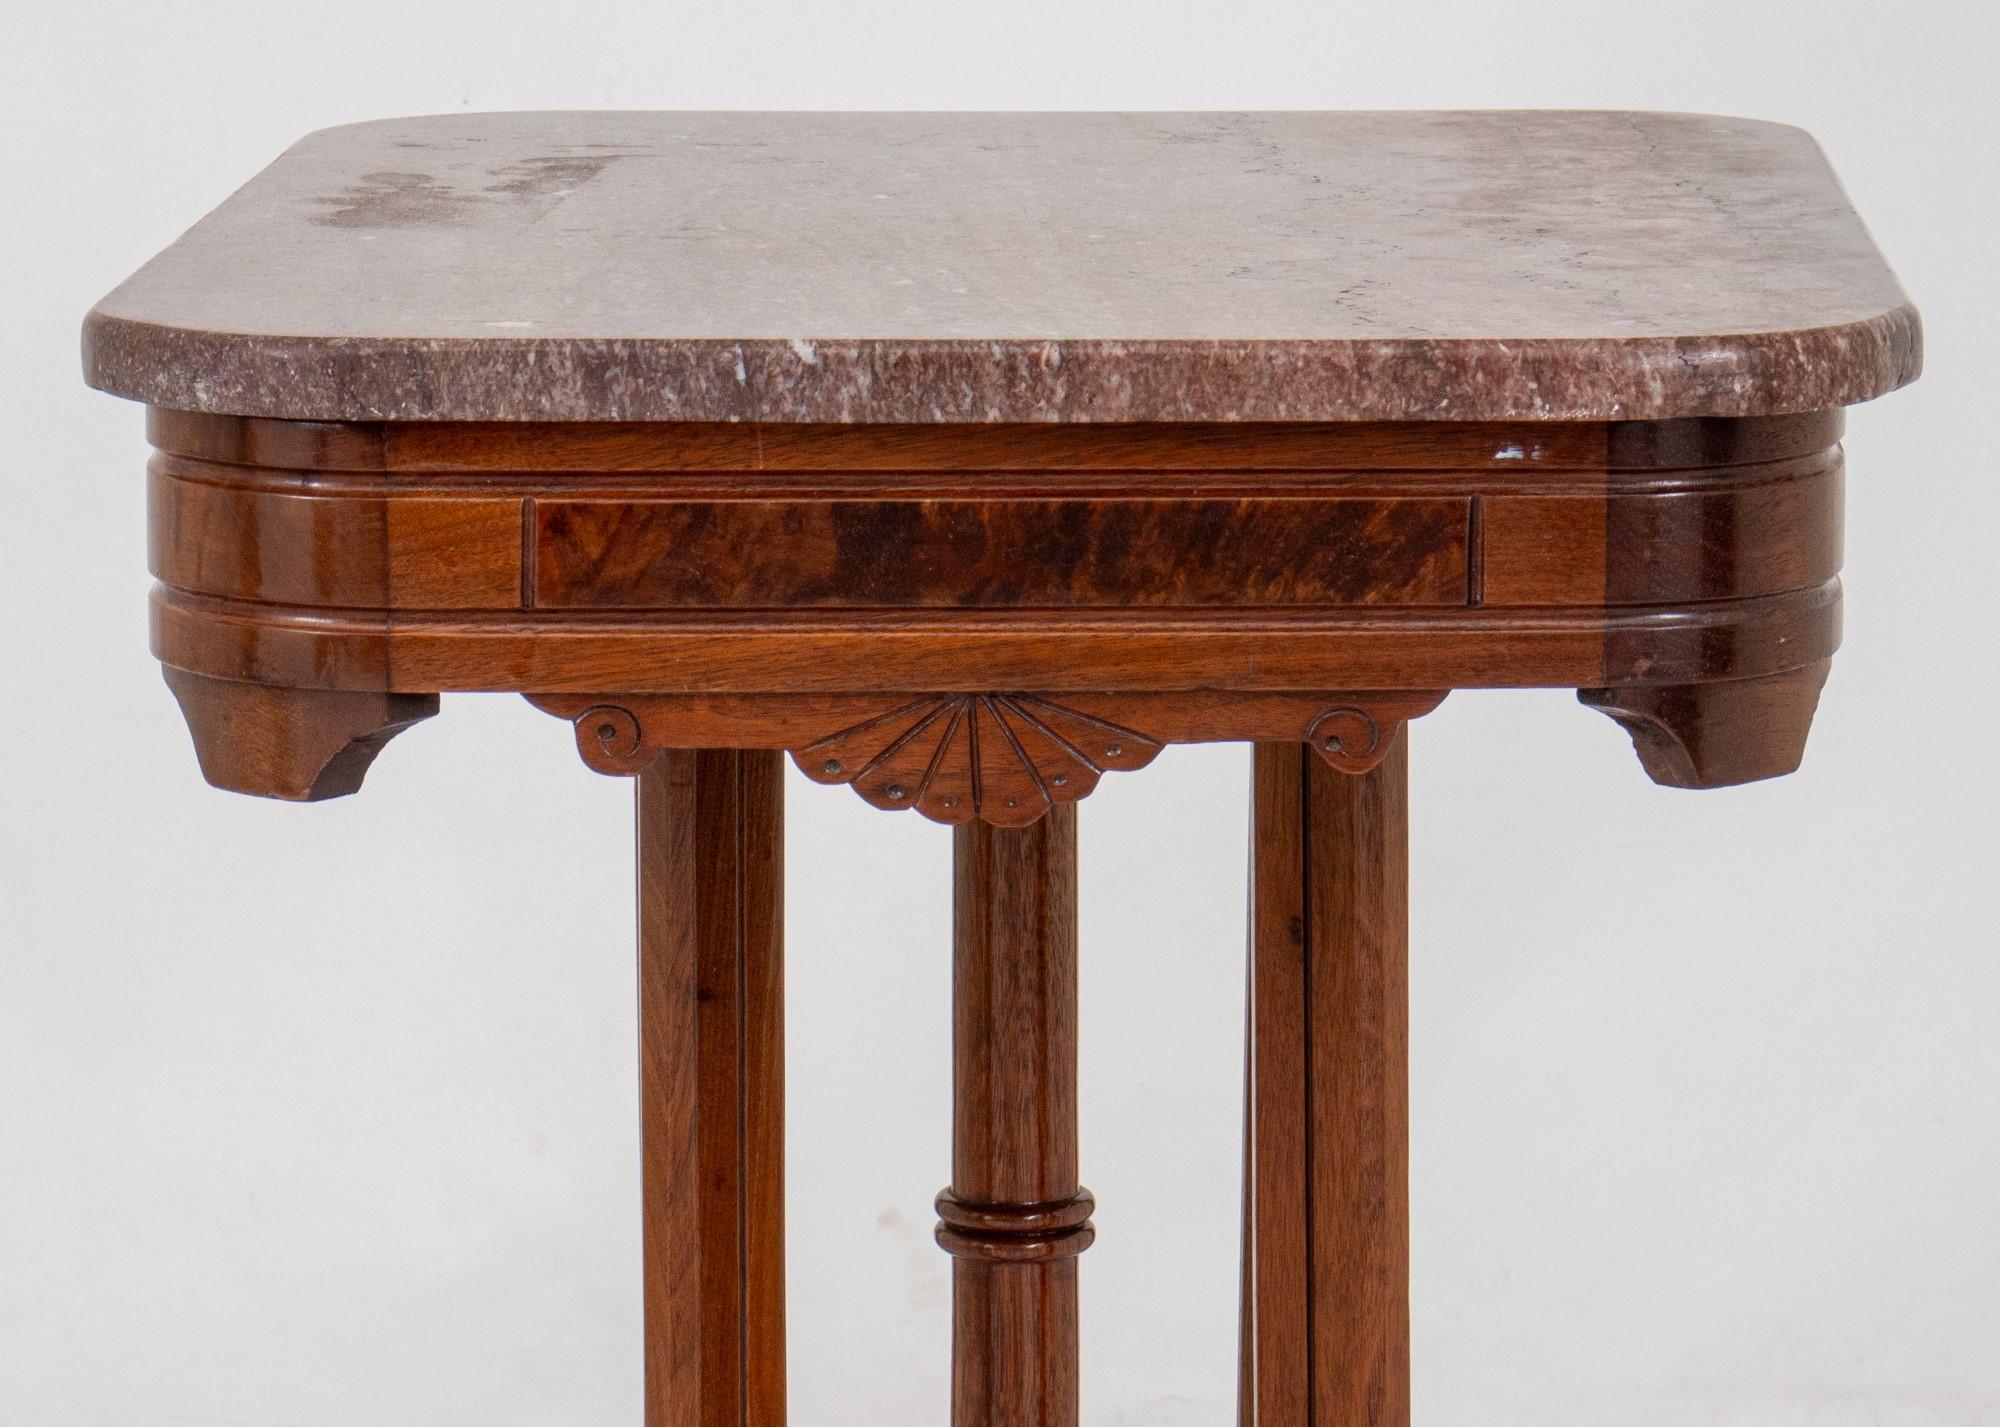 
Victorian Style Walnut Marble Top Table
This description details a Victorian style side table with several characteristic features:

Key features:

Style: Victorian
Material:
Top: Marble
Base: Walnut with burl wood trim
Decoration: Incised foliate